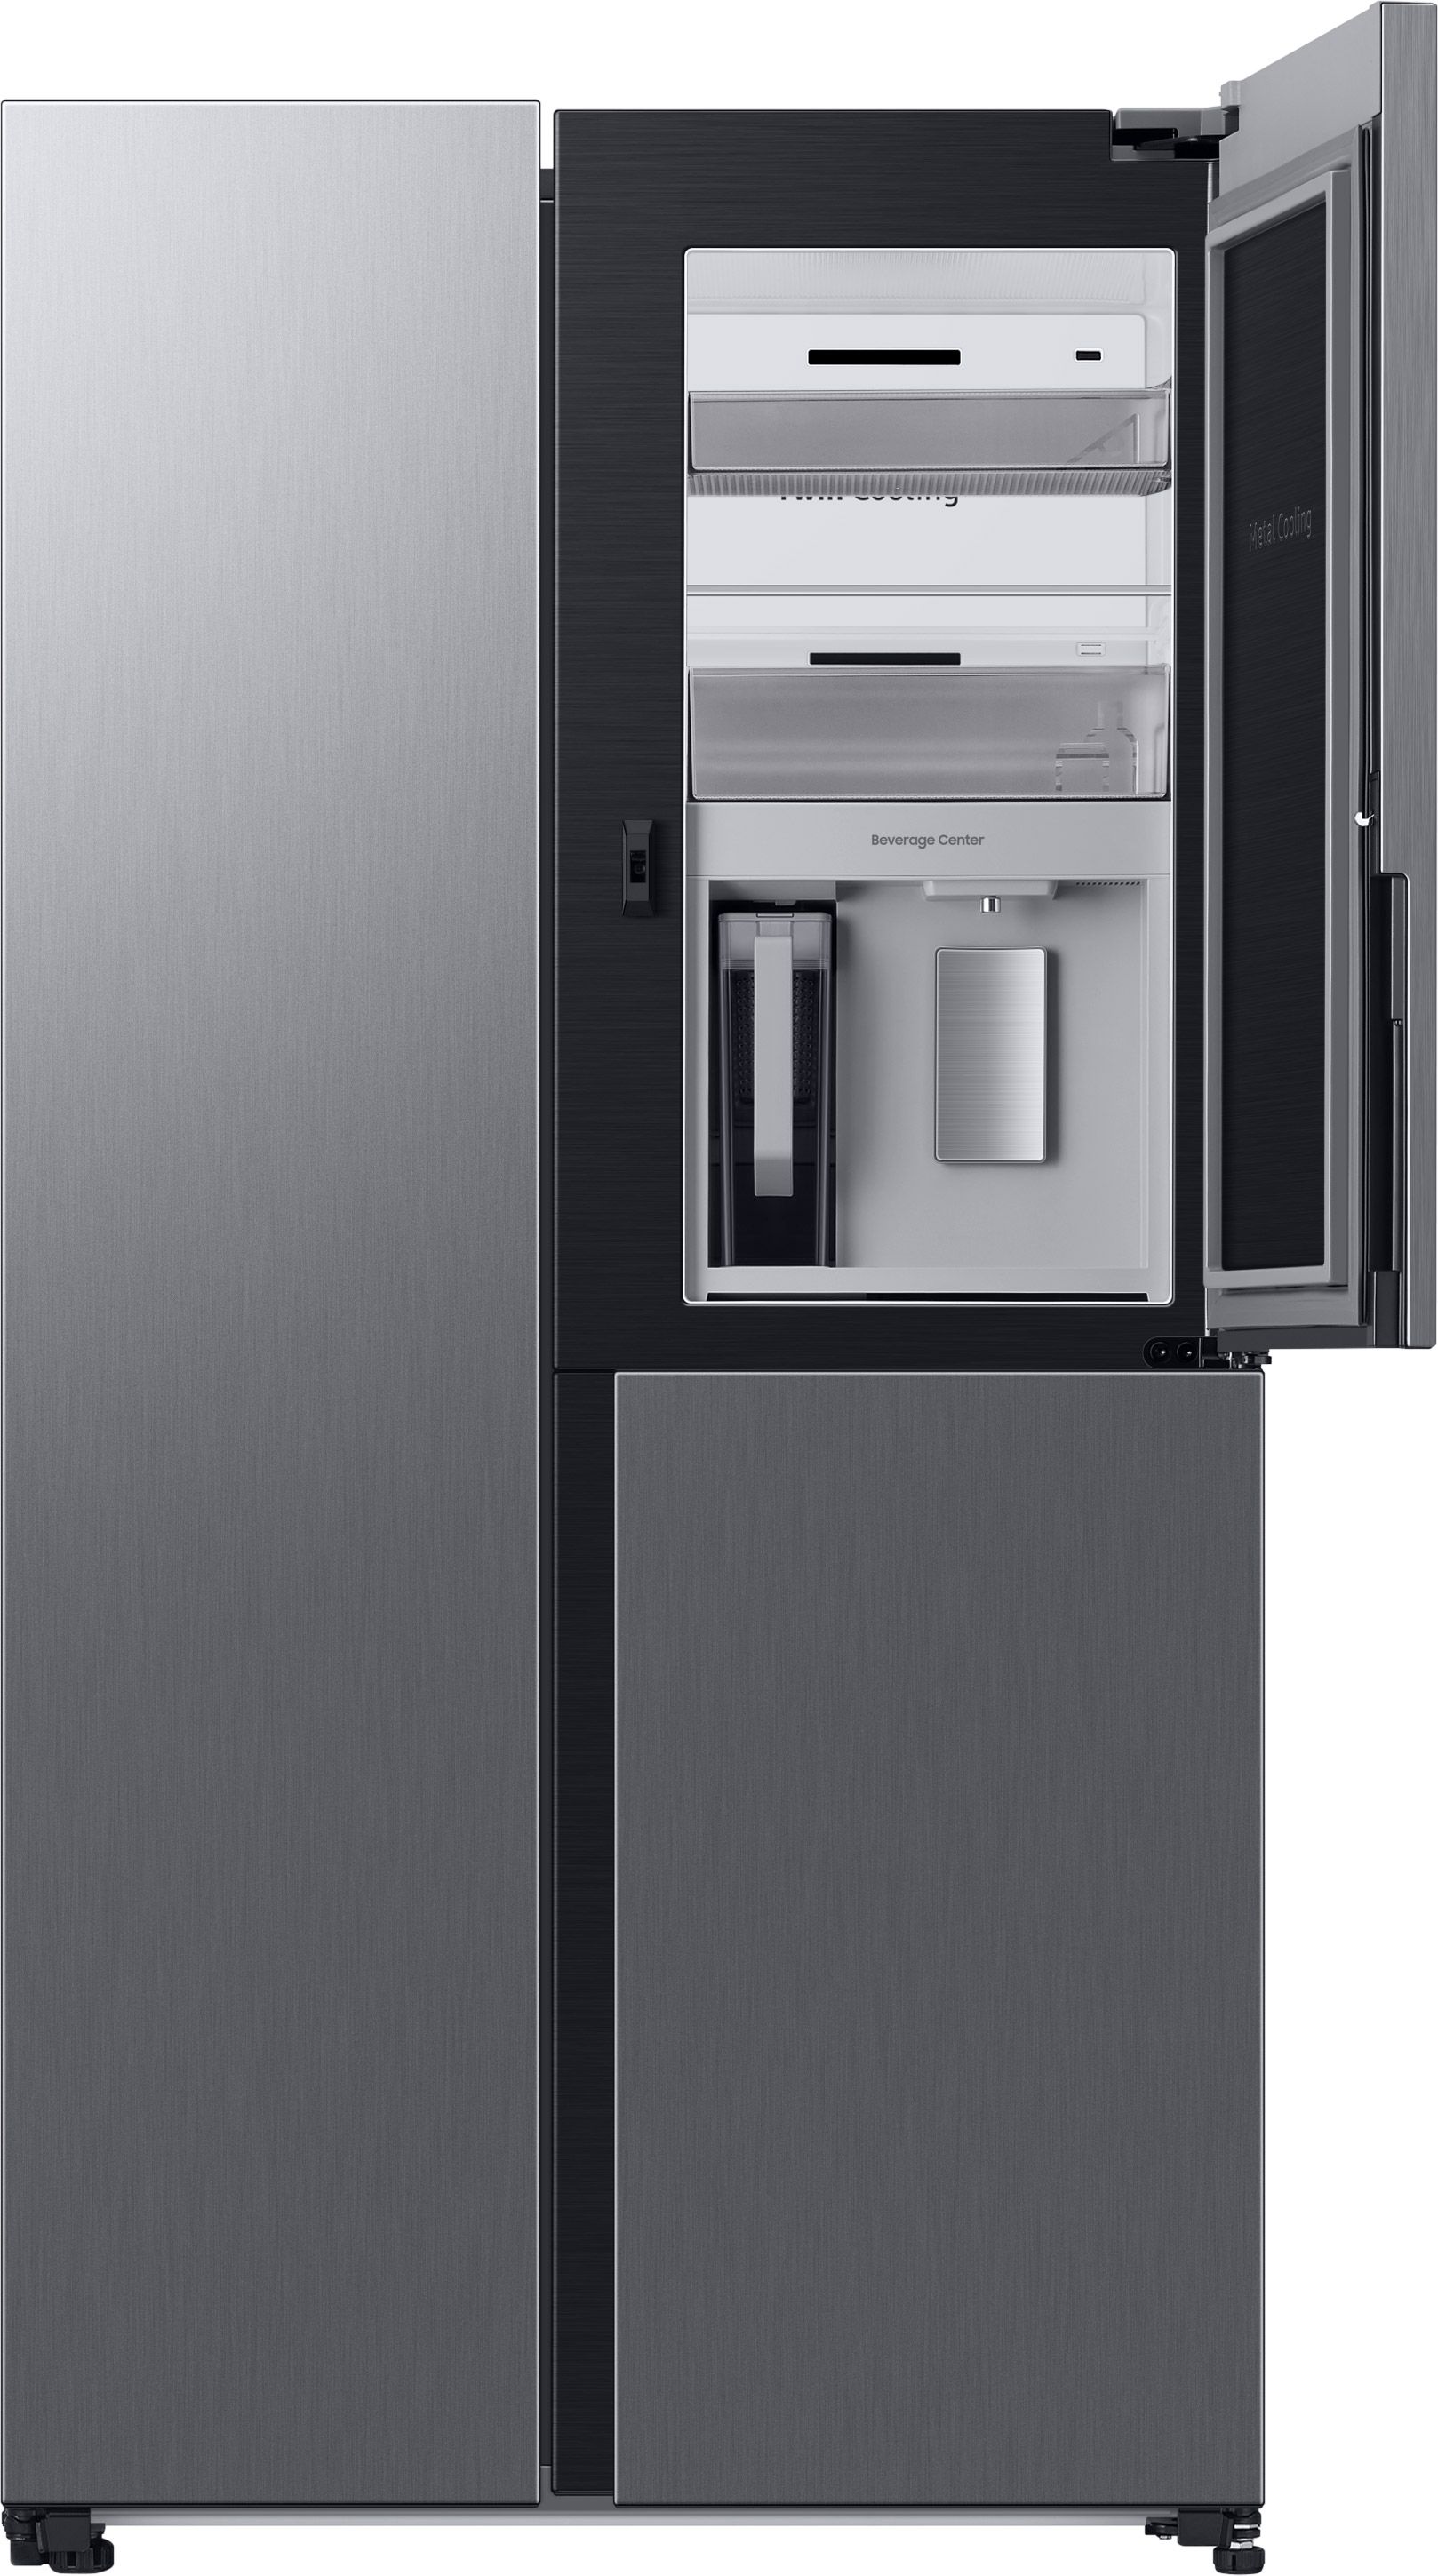 Samsung Series 9 RH69B8931S9 Plumbed Total No Frost American Fridge Freezer - Matte Stainless Steel - E Rated, Stainless Steel